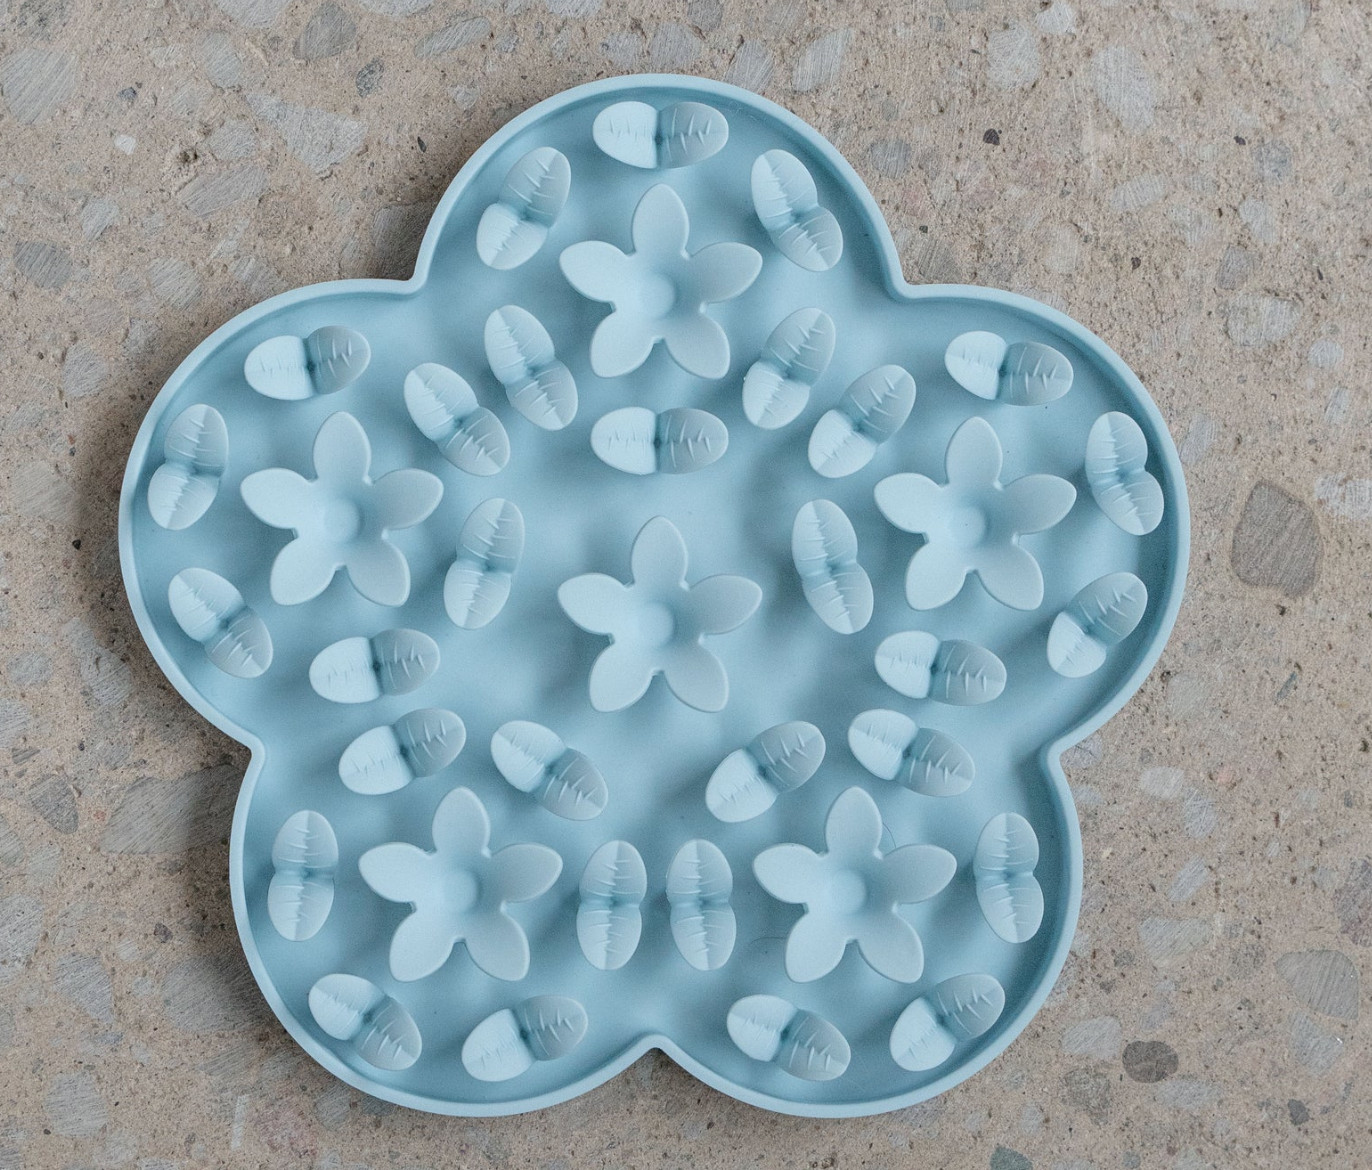 Dexypaws Flower Hide and Seek Silicone Snuffle Mat - Sky Blue